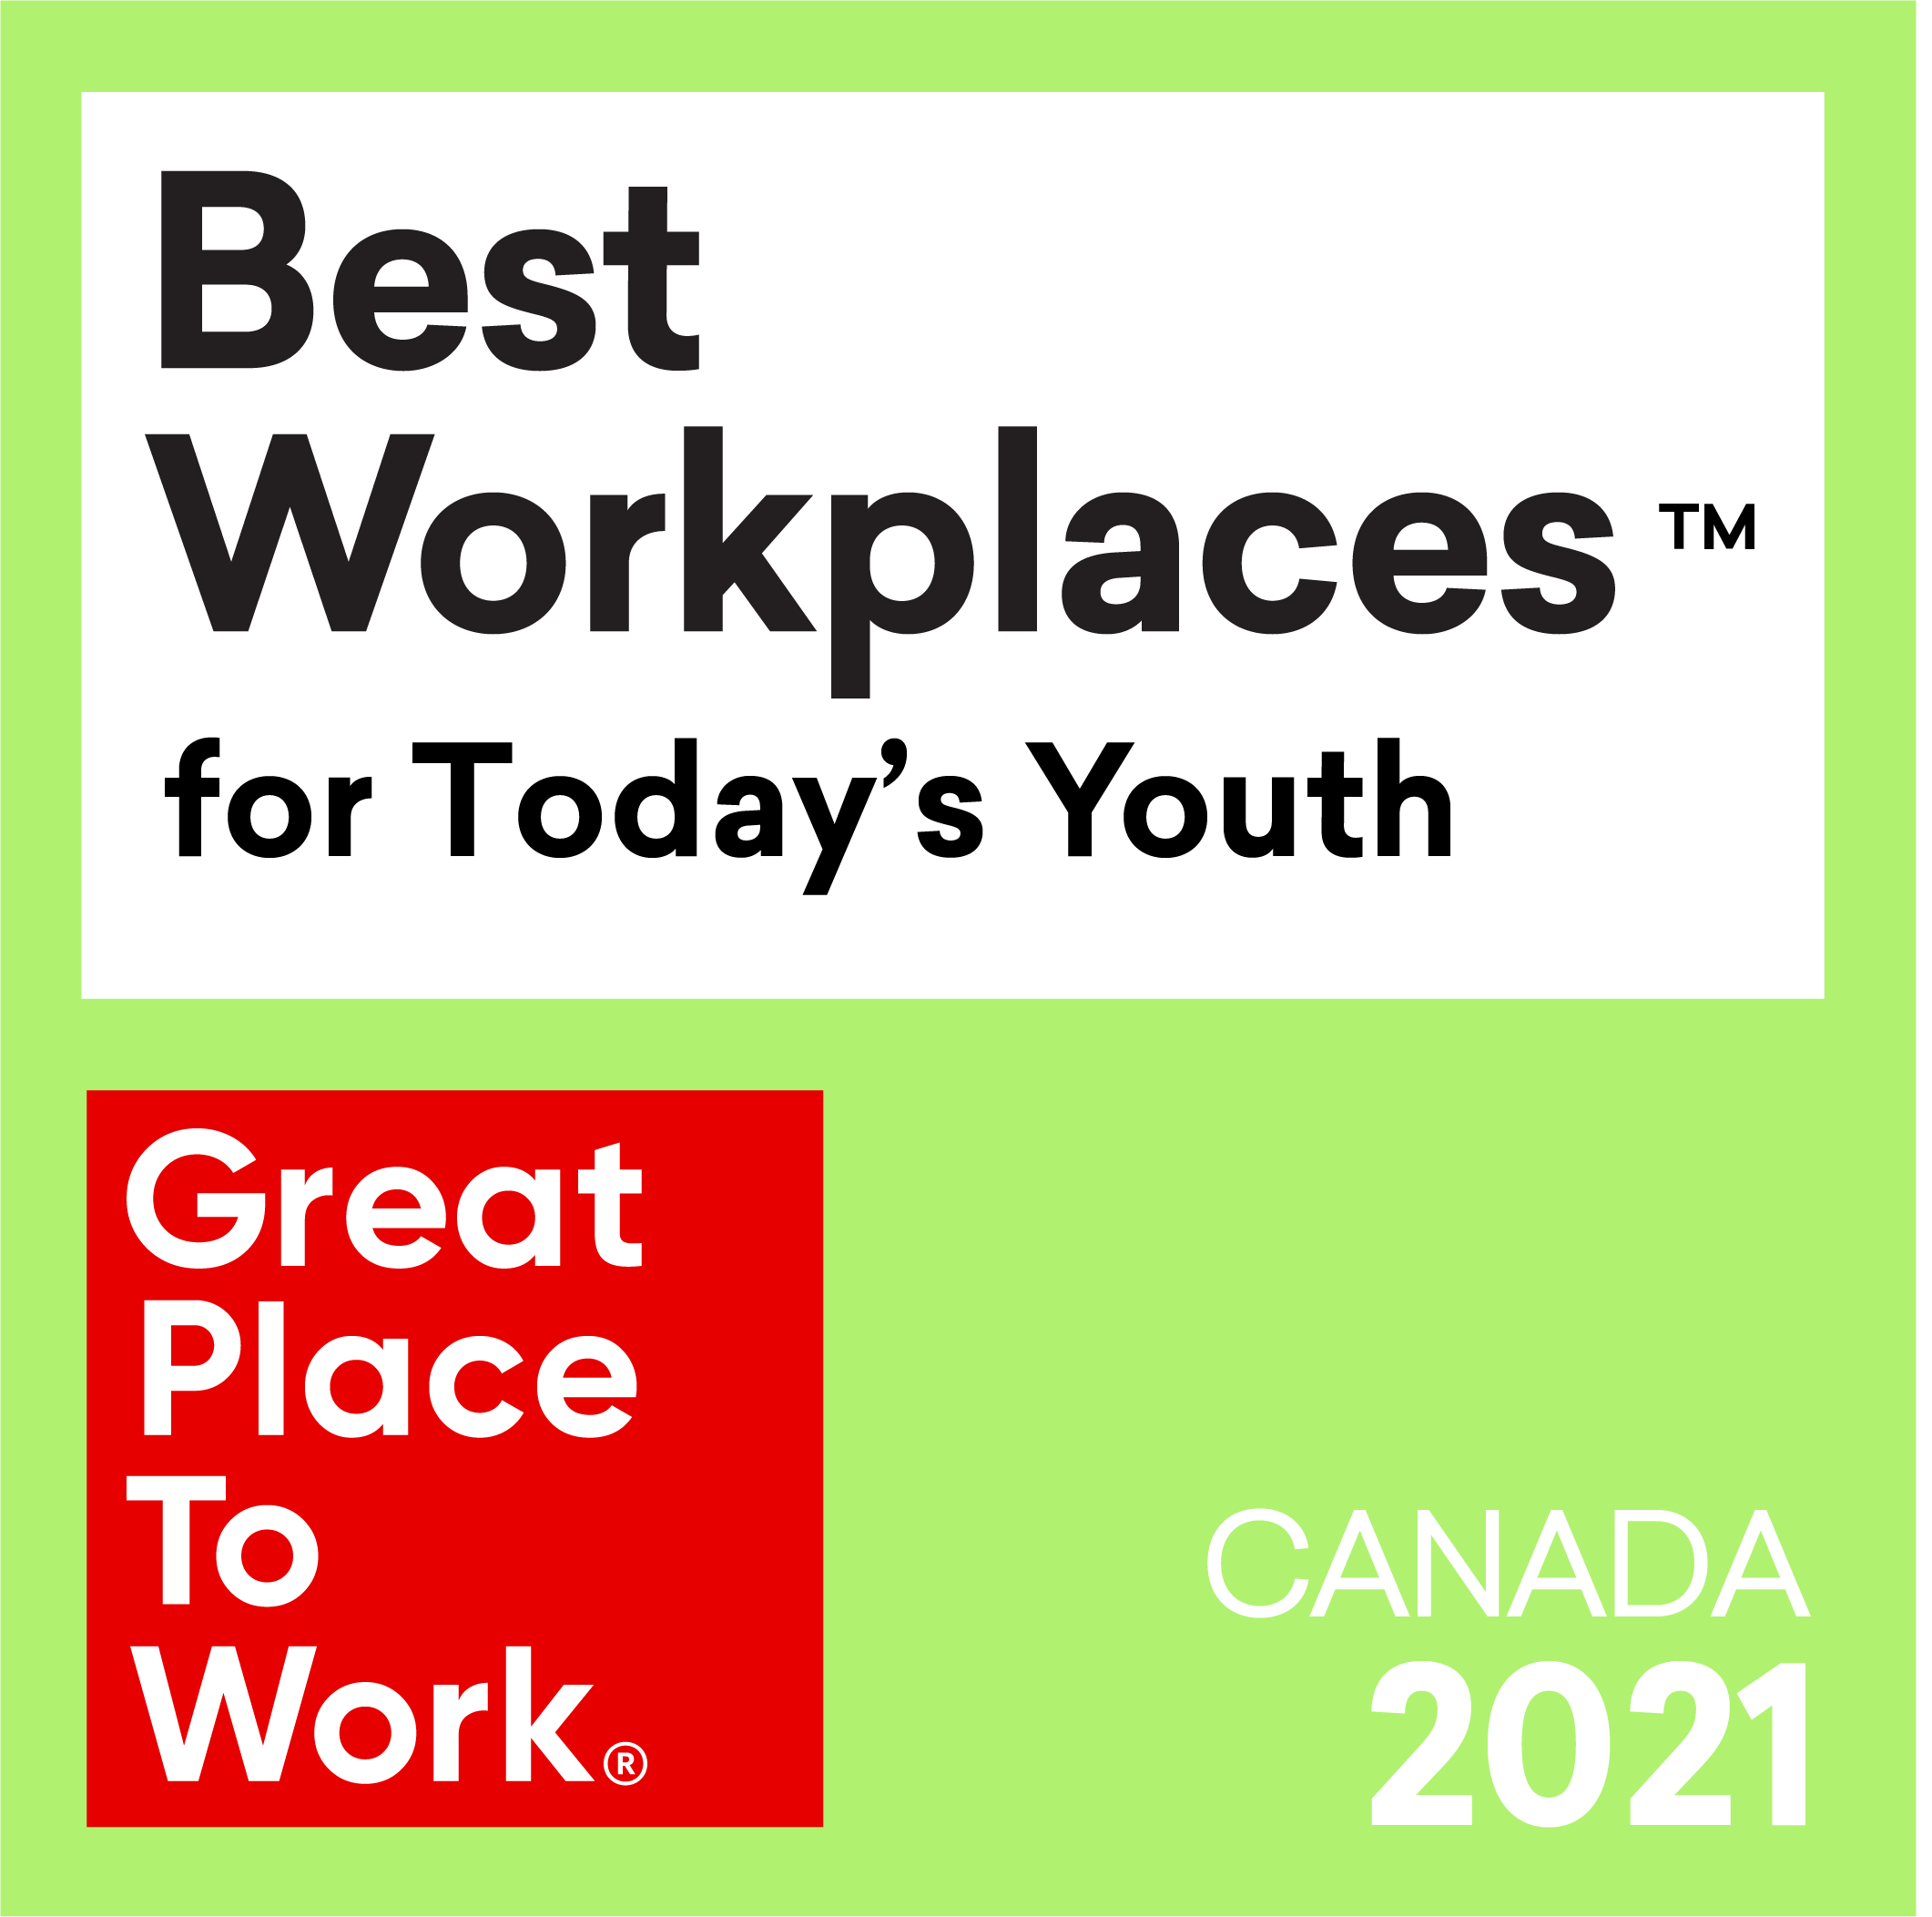 Best Workplaces for Today's Youth 